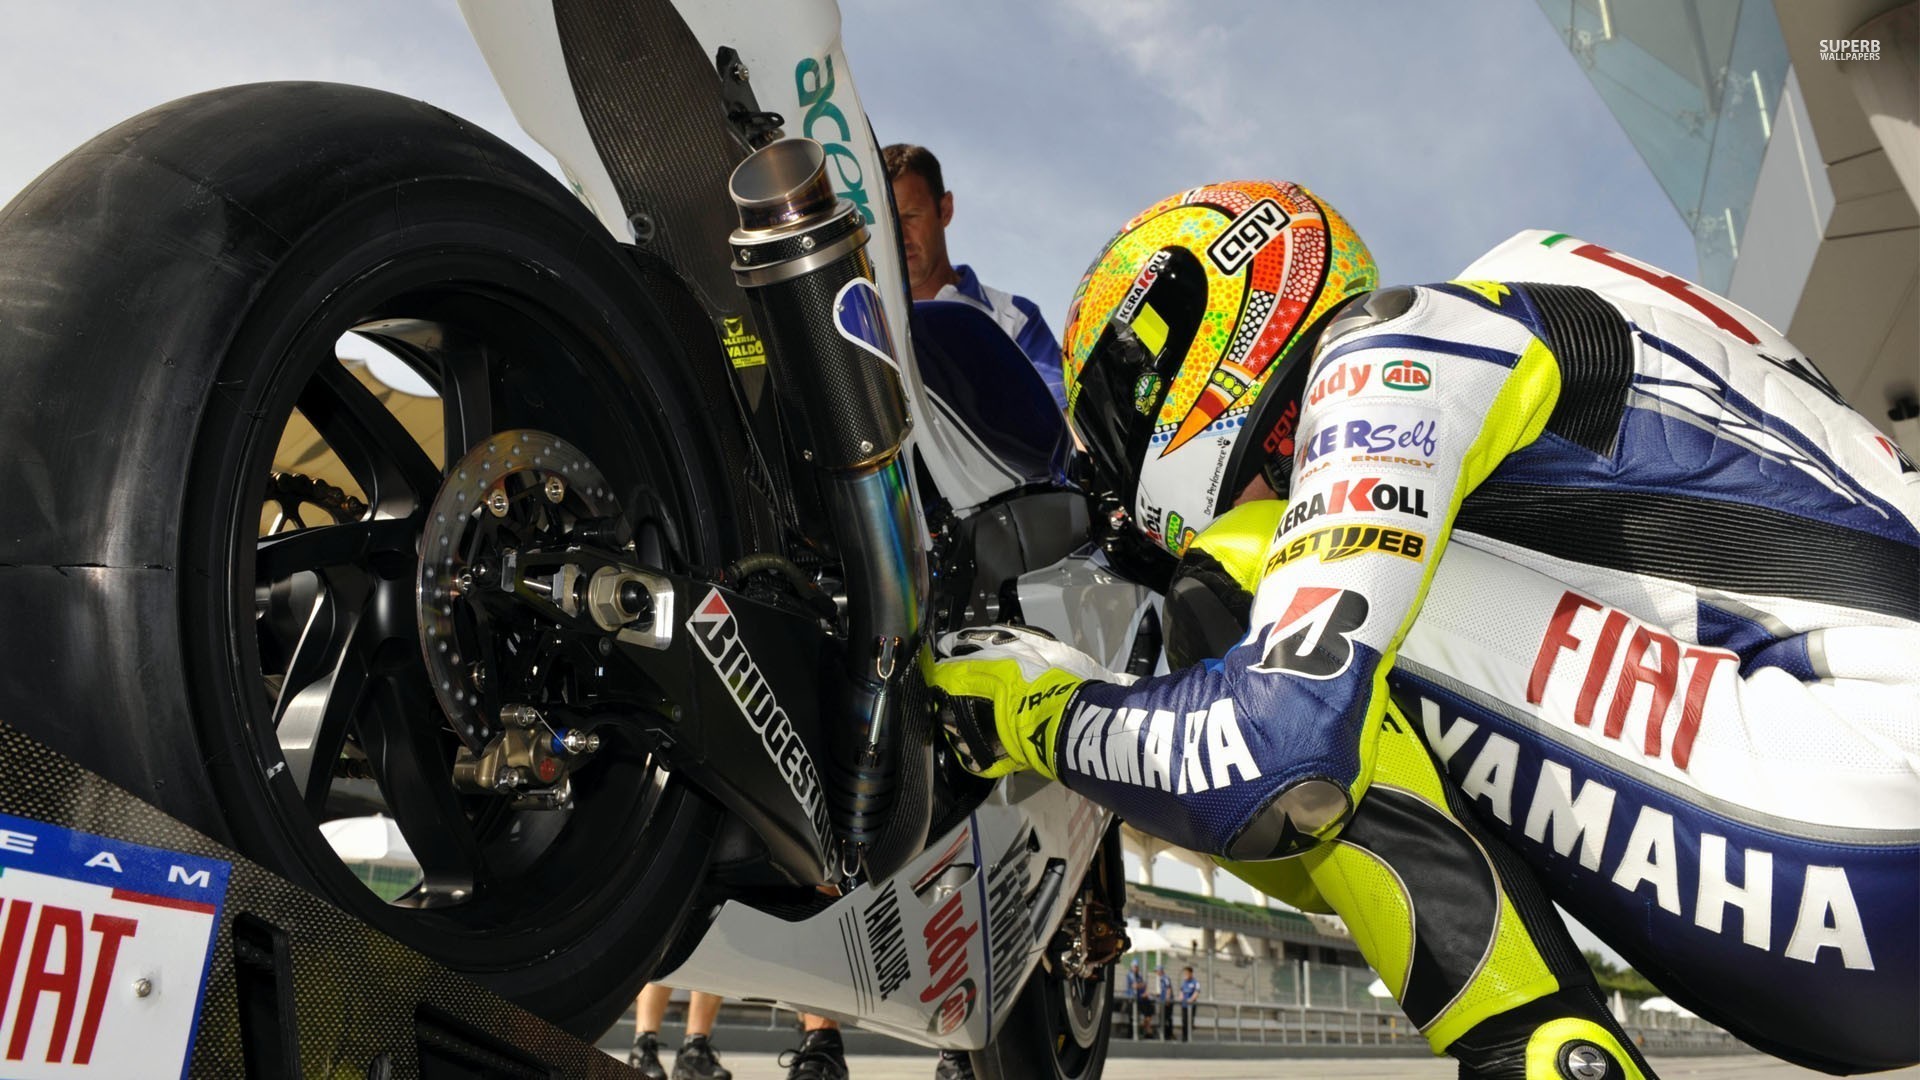 1920x1080 Valentino Rossi Motorcycle wallpapers | Wide Screen Wallpaper 1080p,2K .